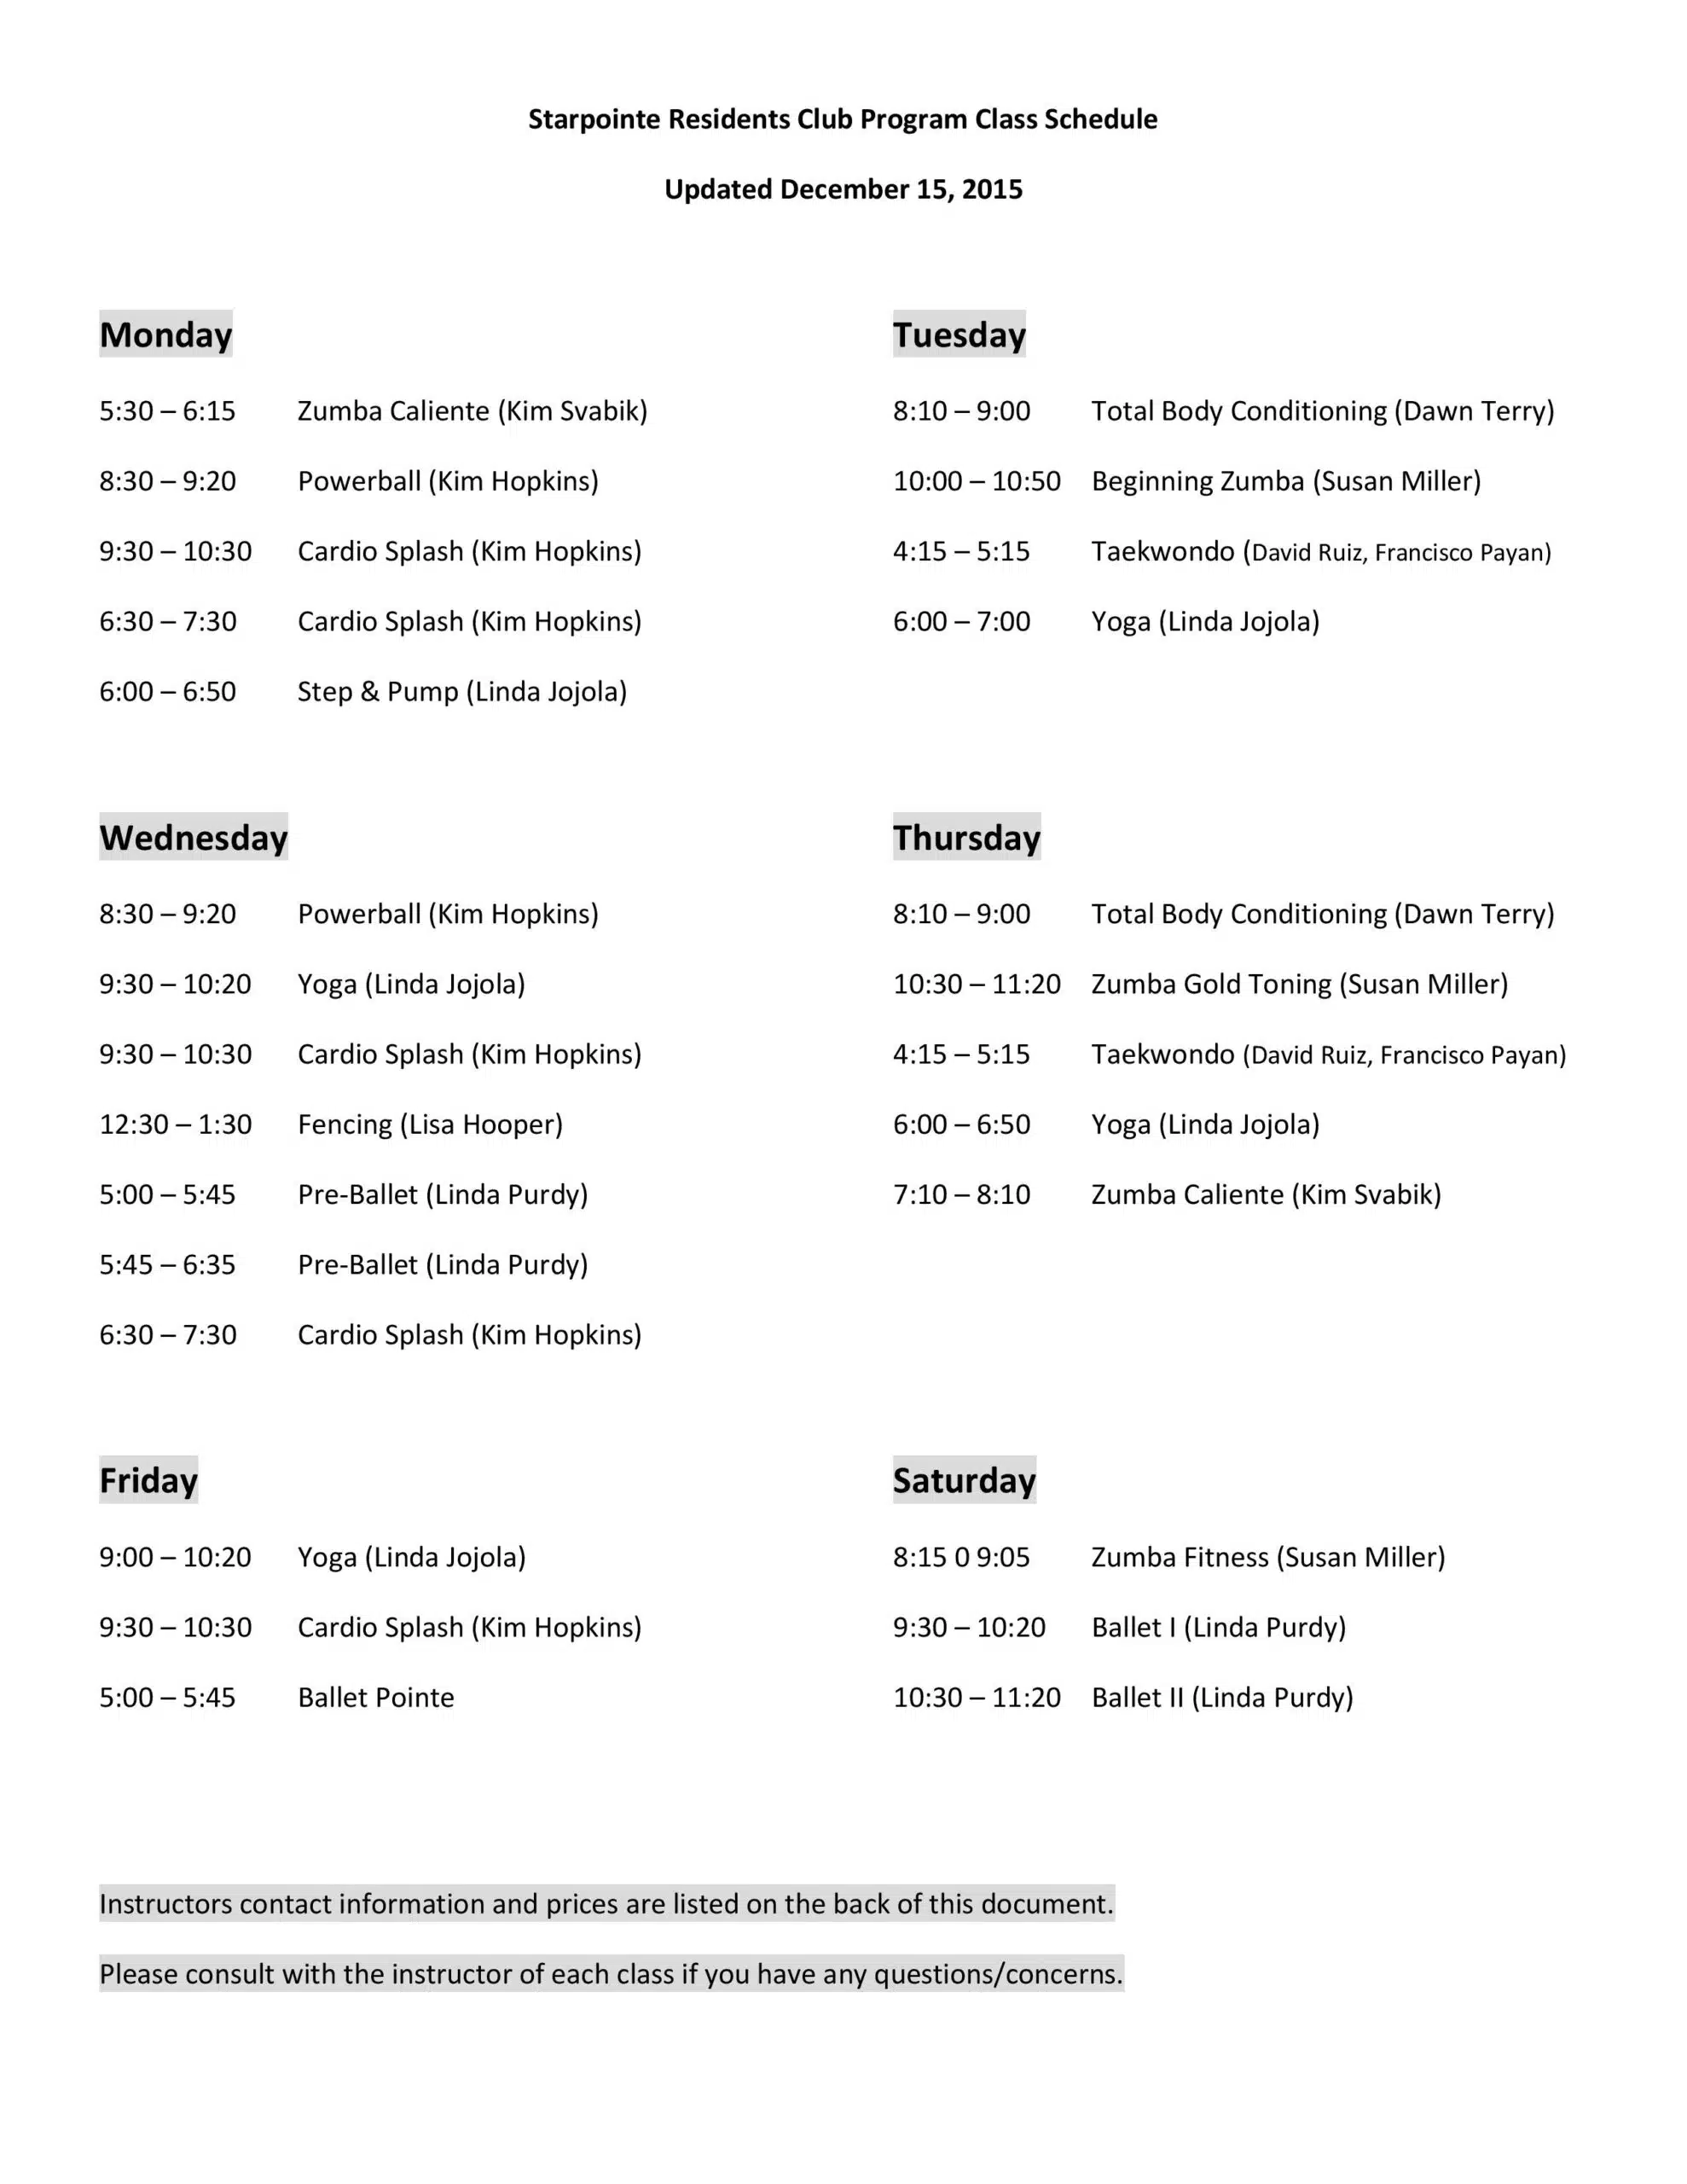 STARPOINTE RESIDENTS CLUB PROGRAM CLASS SCHEDULE INSTRUCTORS AND PRICES 12_15_2015-page-001